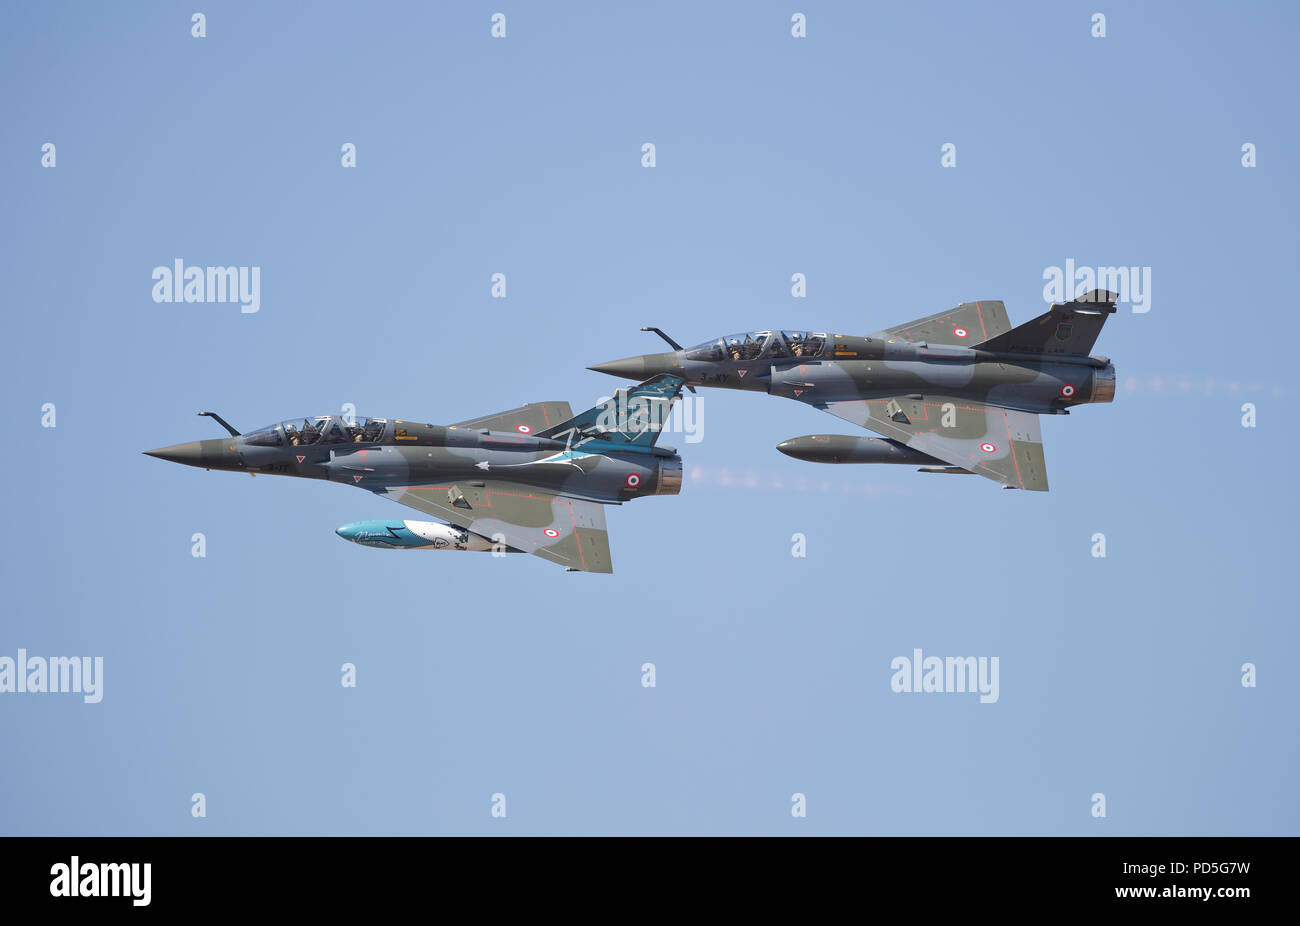 Pair of Mirage 2000Ds displaying at RAF RIAT air show, uk, 2018 Stock Photo